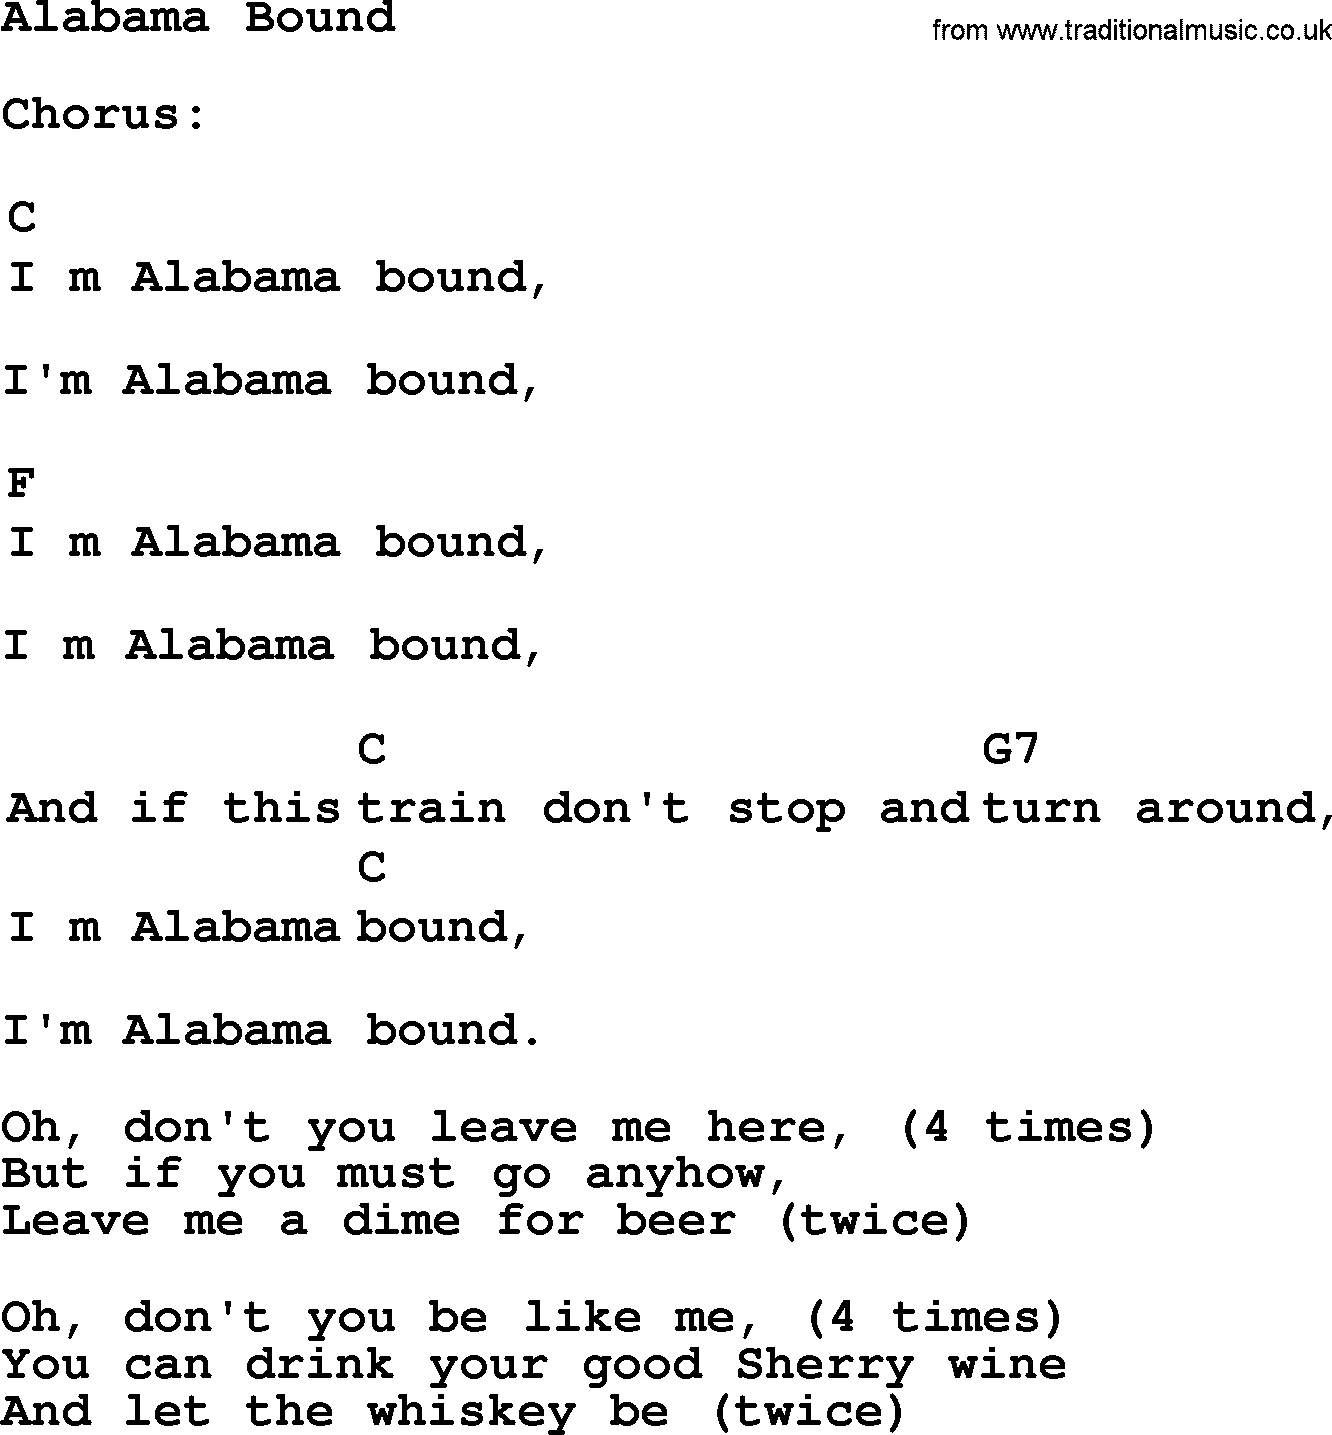 Top 1000 Most Popular Folk and Old-time Songs: Alabama Bound, lyrics and chords